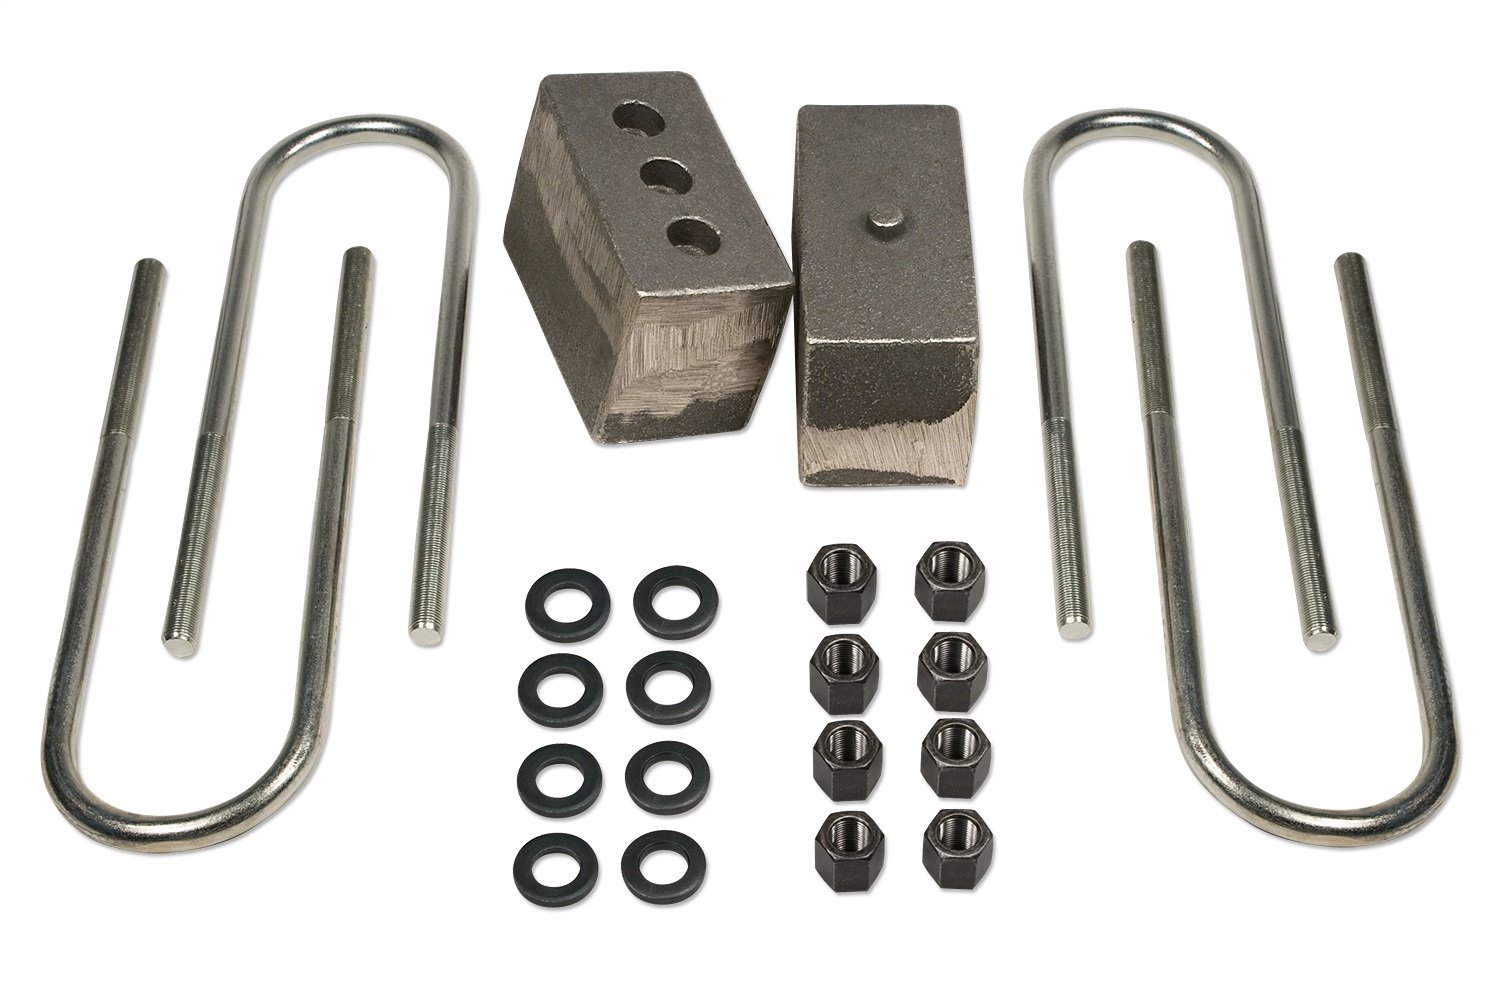 Axle Lift Blocks Kit 4 in. H x 3 in. W x 5.75 in. L Tapered For Vehicles w/3.5 in. Rear Axle Tube Dual Pinned Incl. U-Bolts